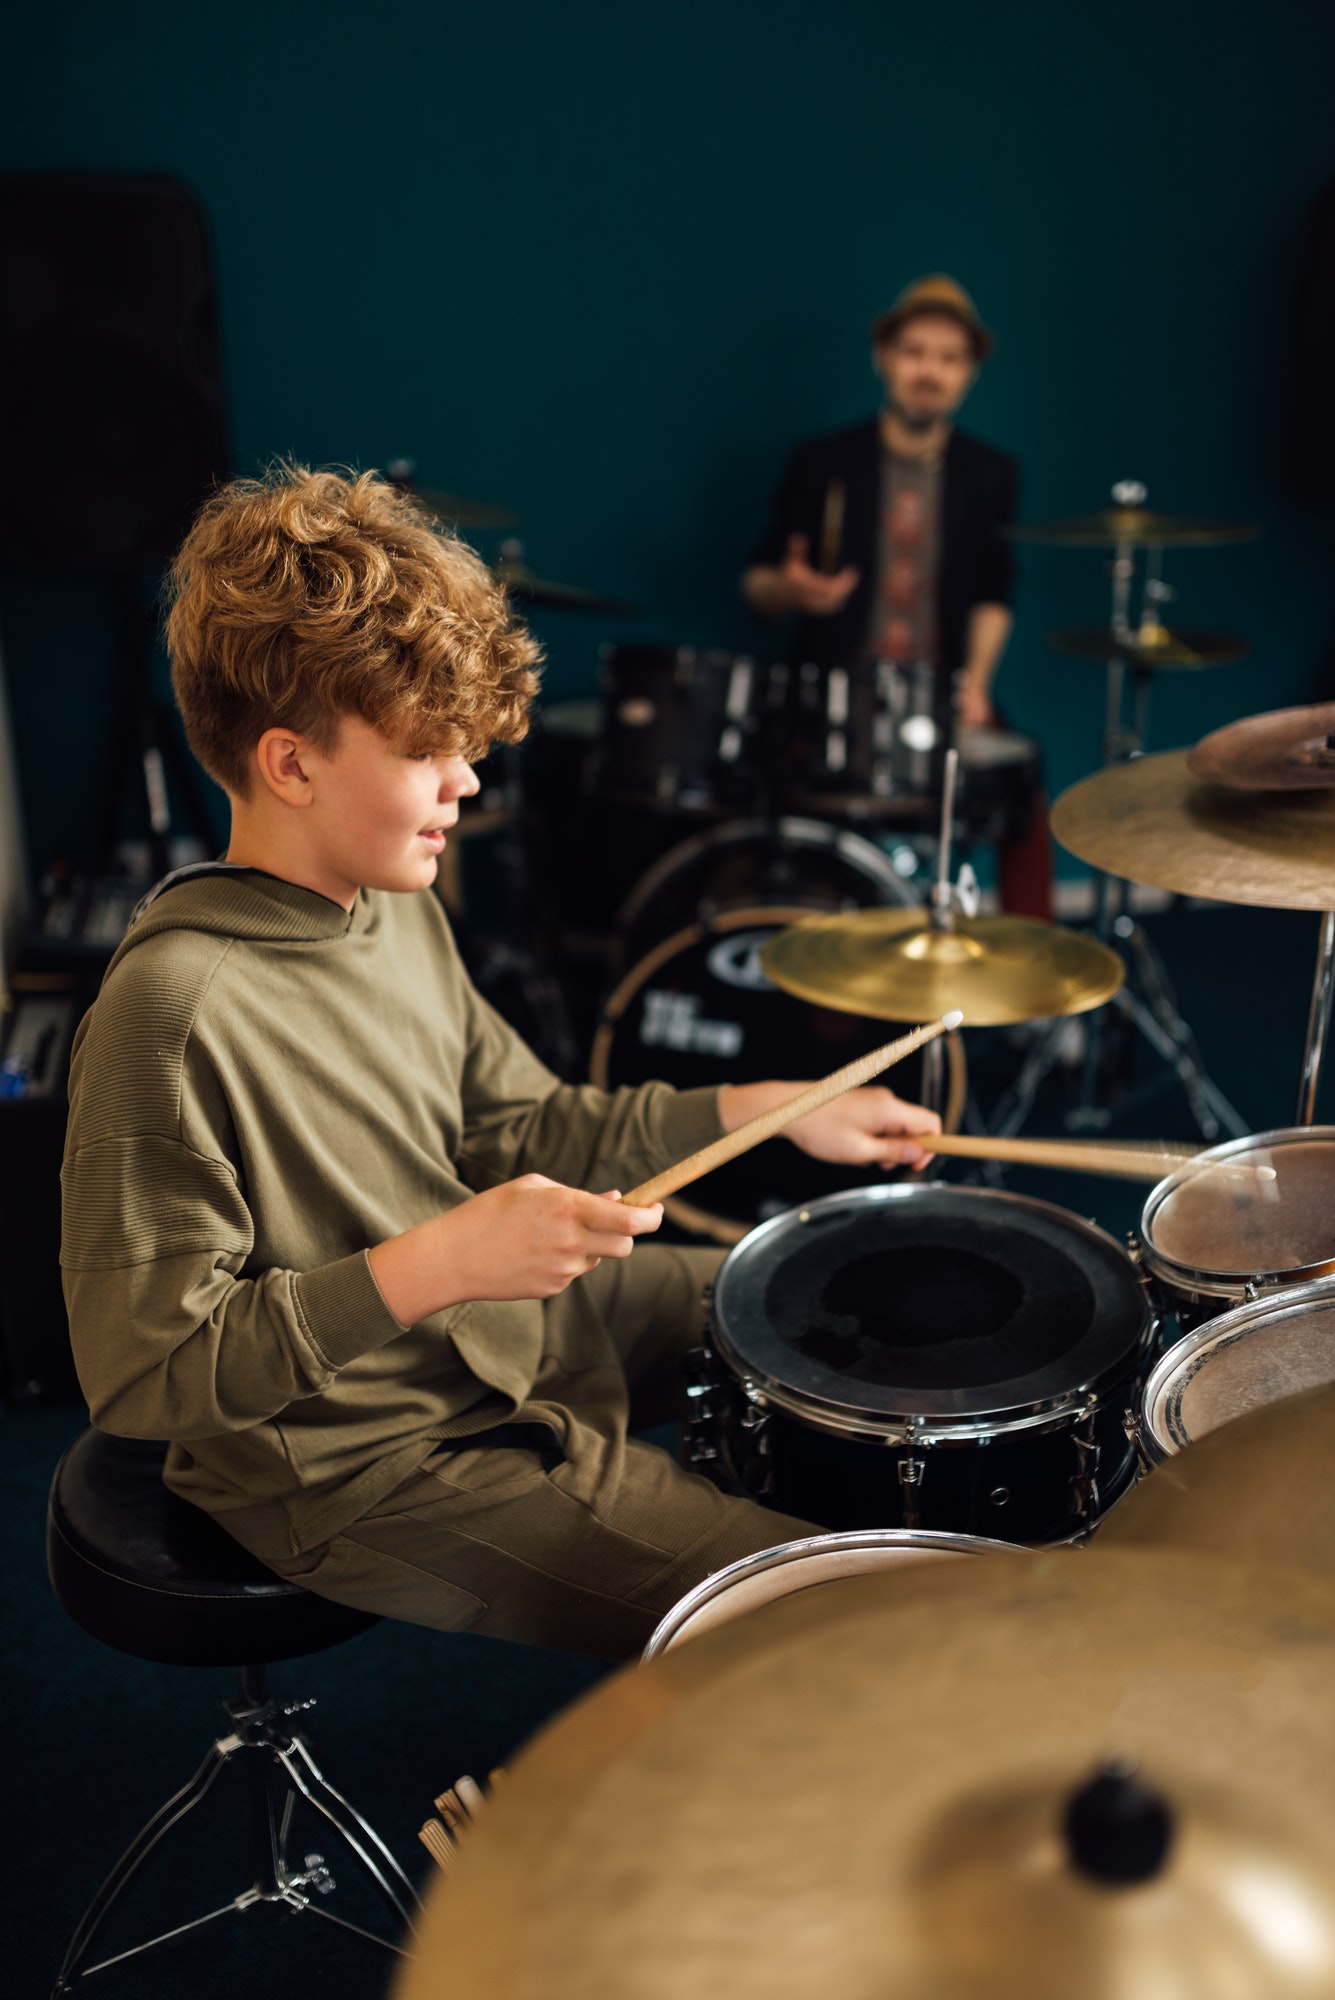 Boy at music school learning to play drums.